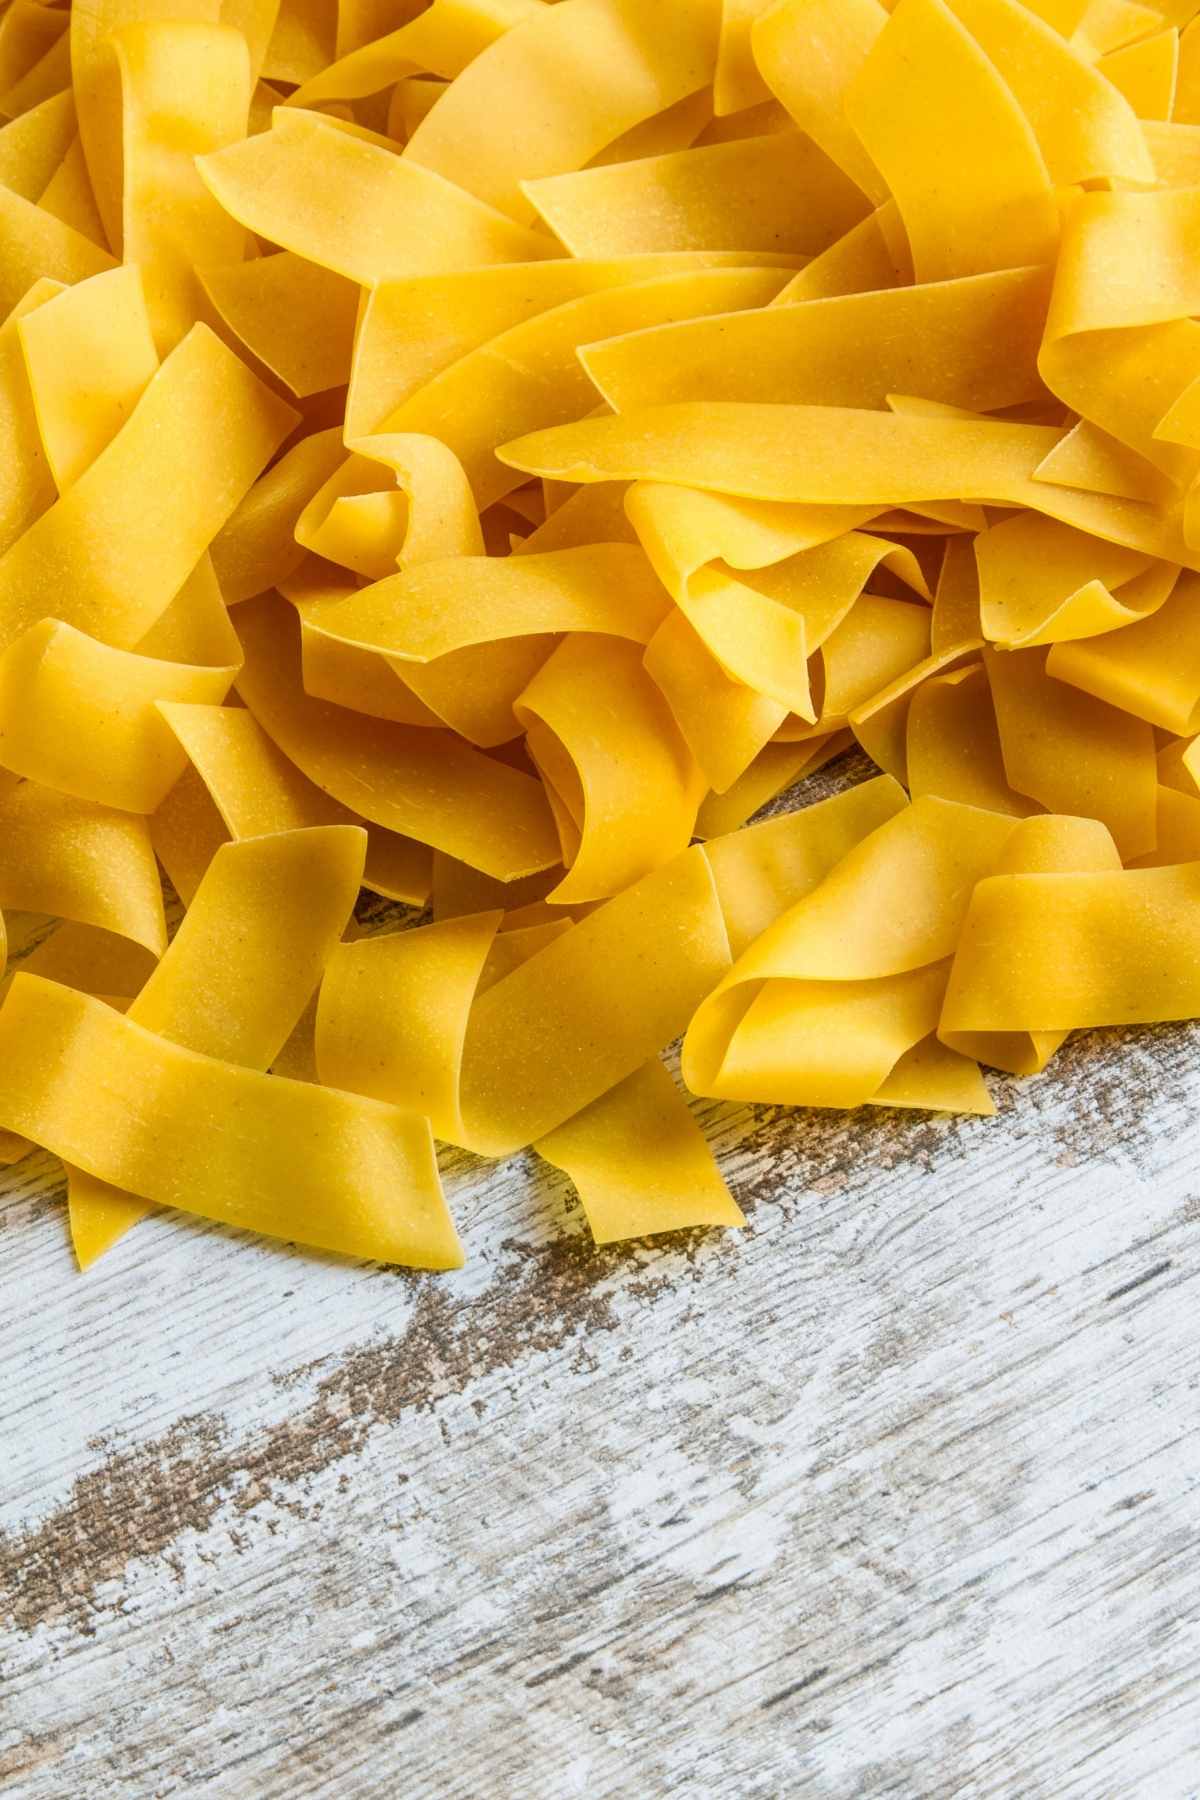 Pappardelle is a wide-shaped pasta that is often featured in Italian restaurants. It pairs well with rich sauces and gives dishes a beautiful presentation.